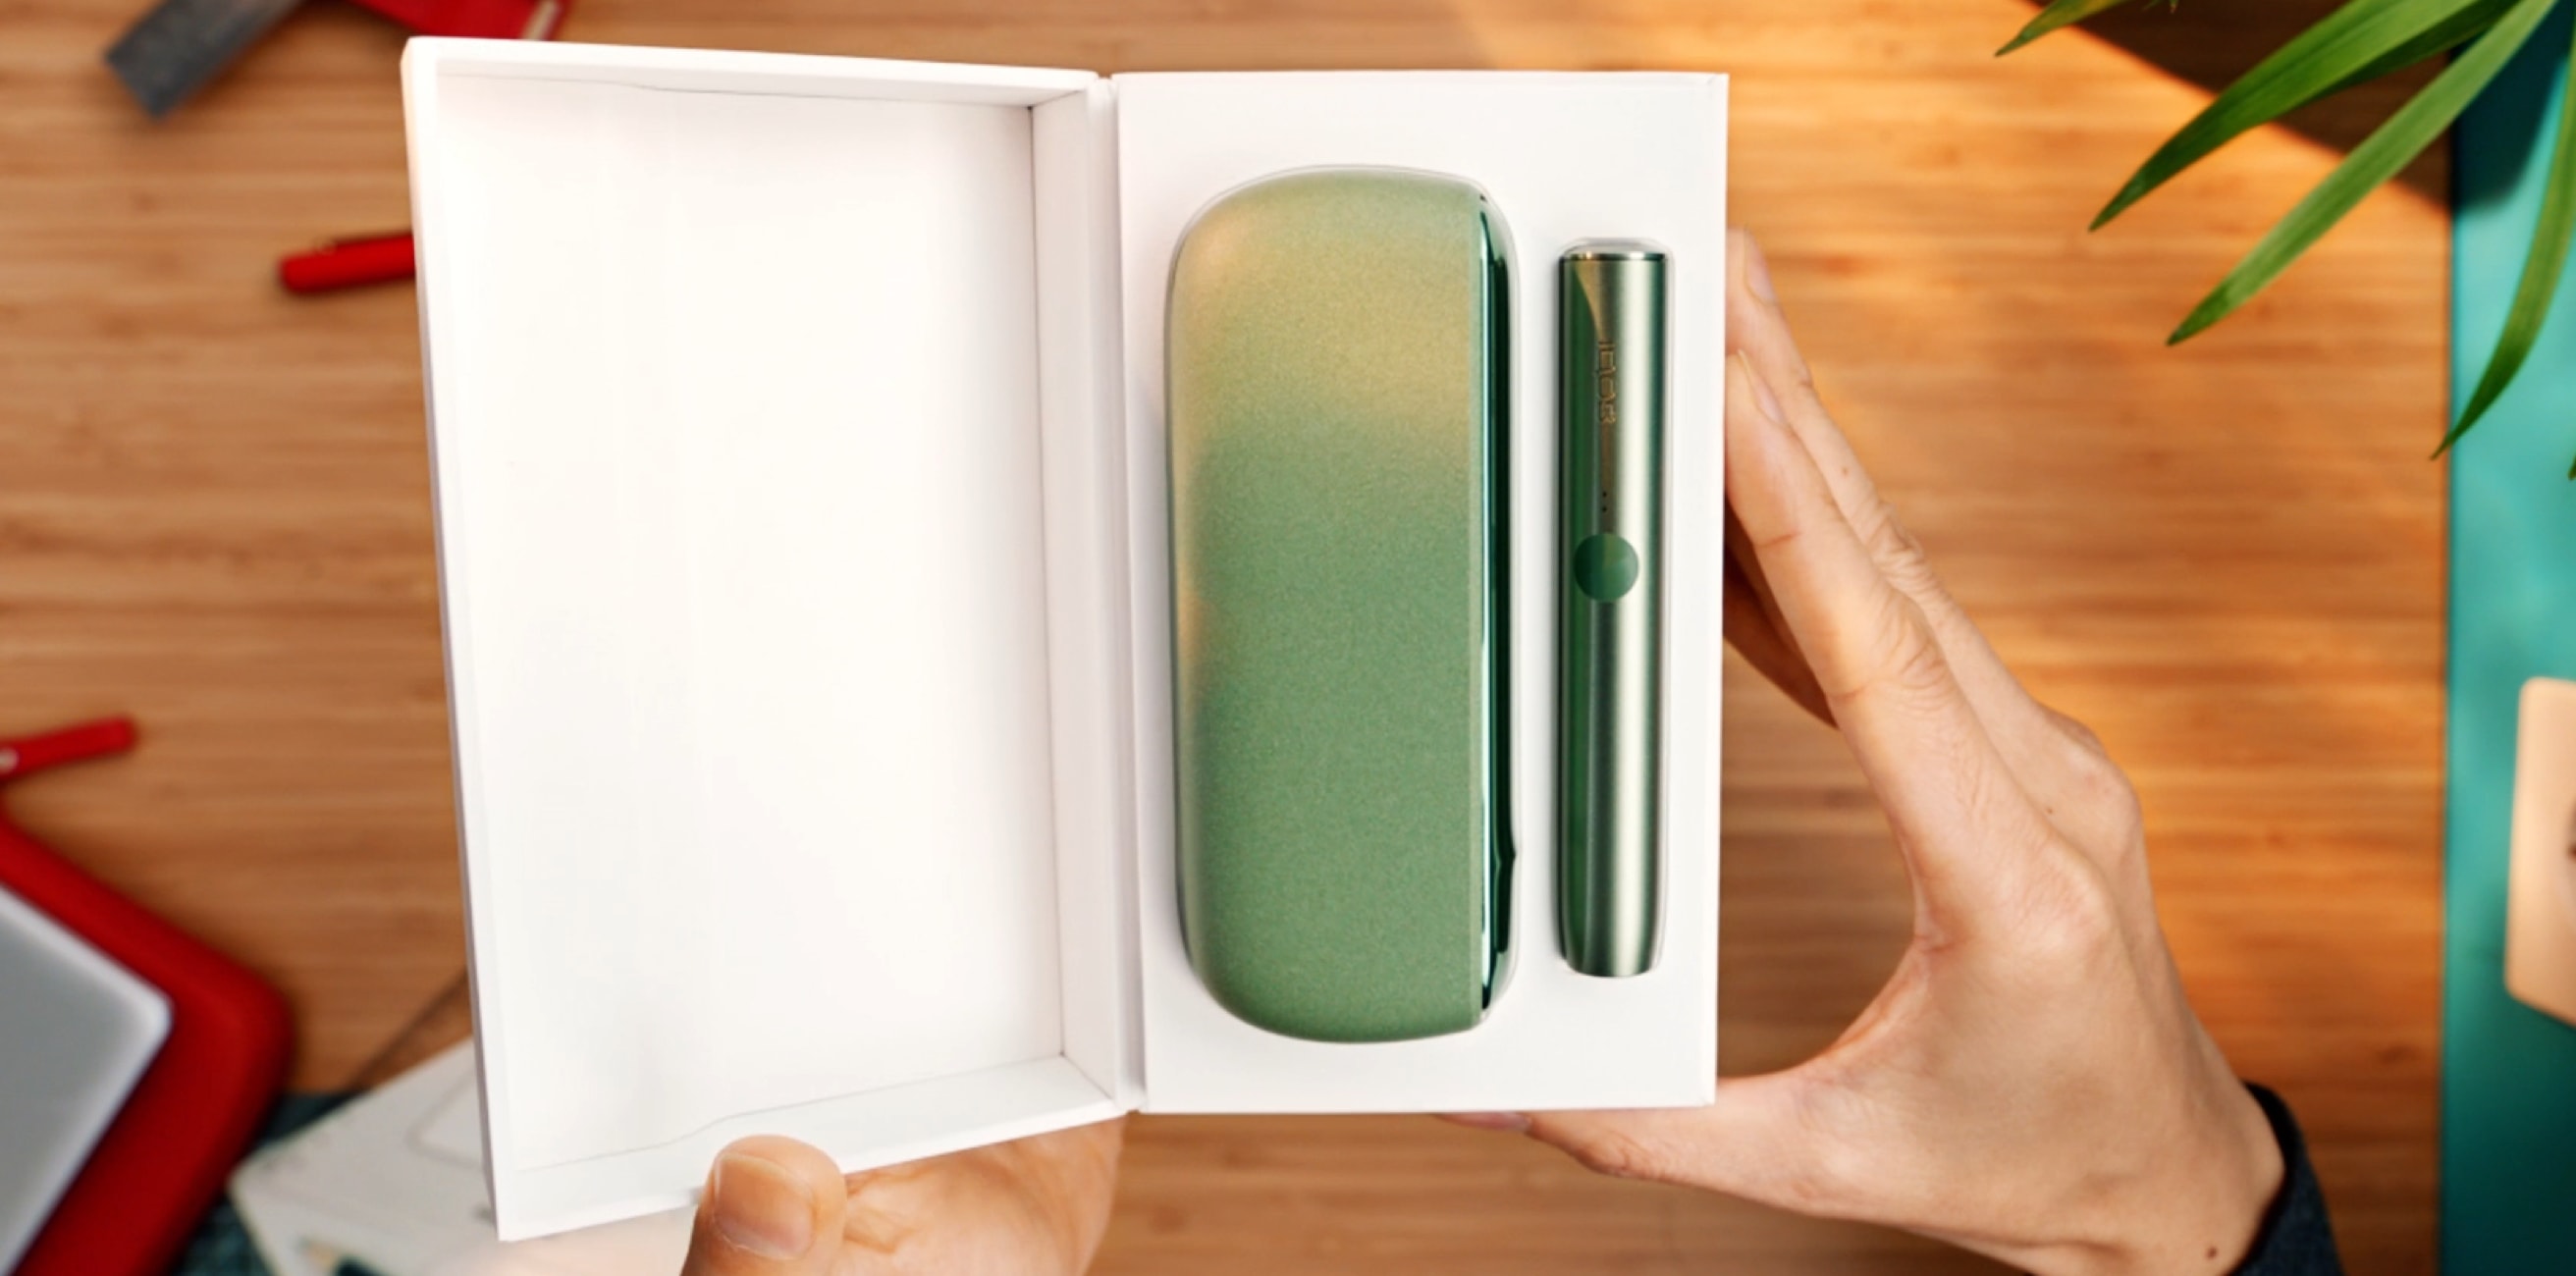 A Moss Green IQOS ILUMA holder and Pocket Charger in a box.